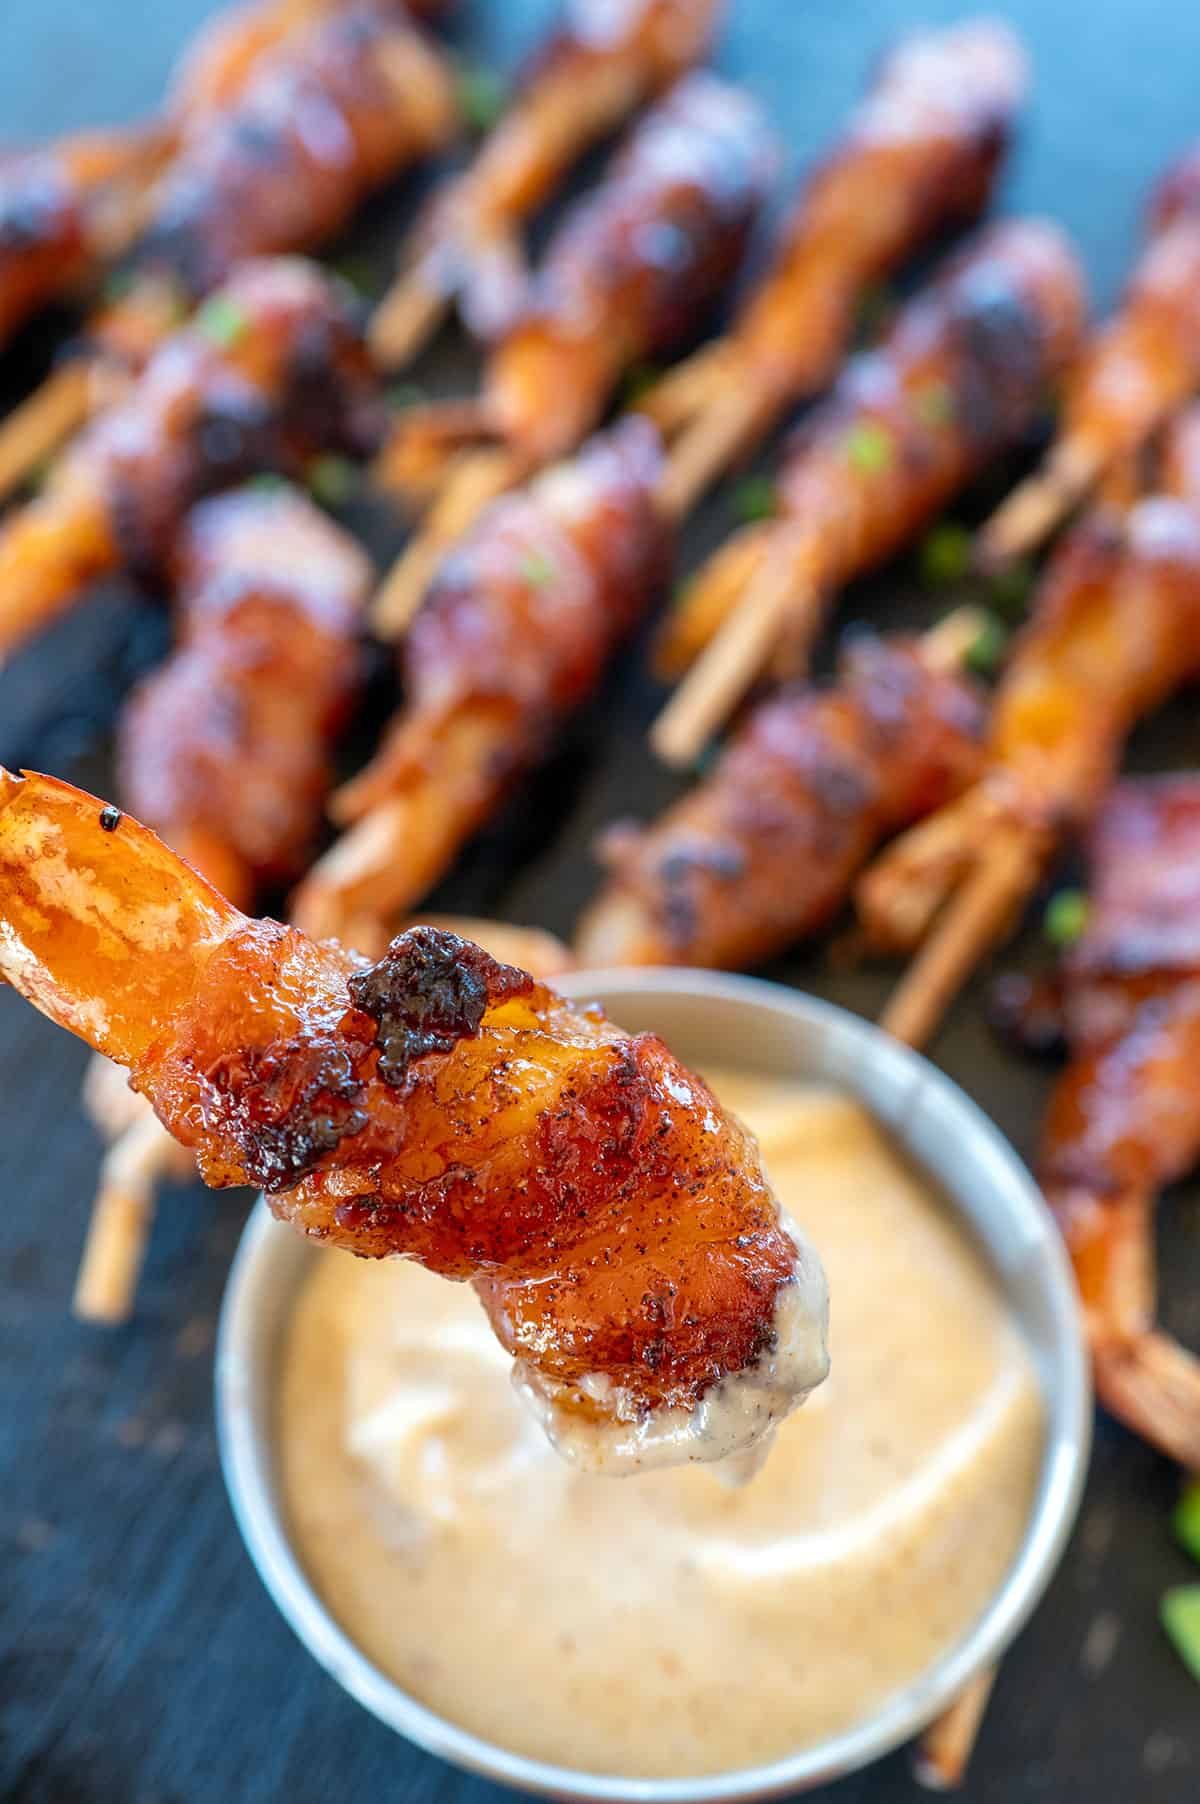 Dipping bacon-wrapped shrimp in aioli.